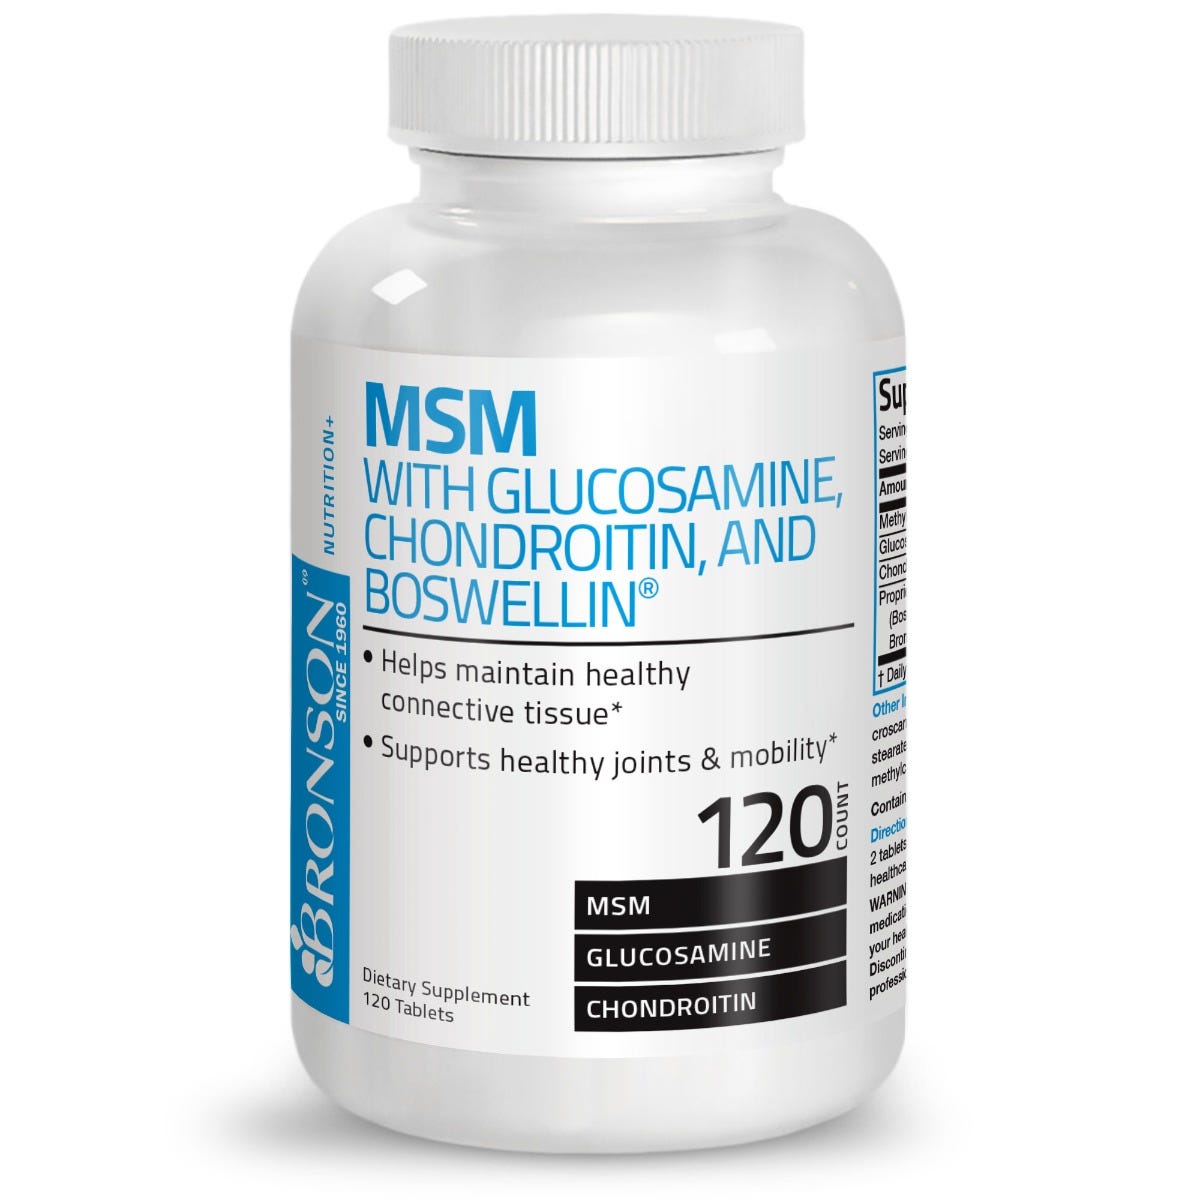 MSM with Glucosamine, Chondroitin, Boswellin® view 1 of 6